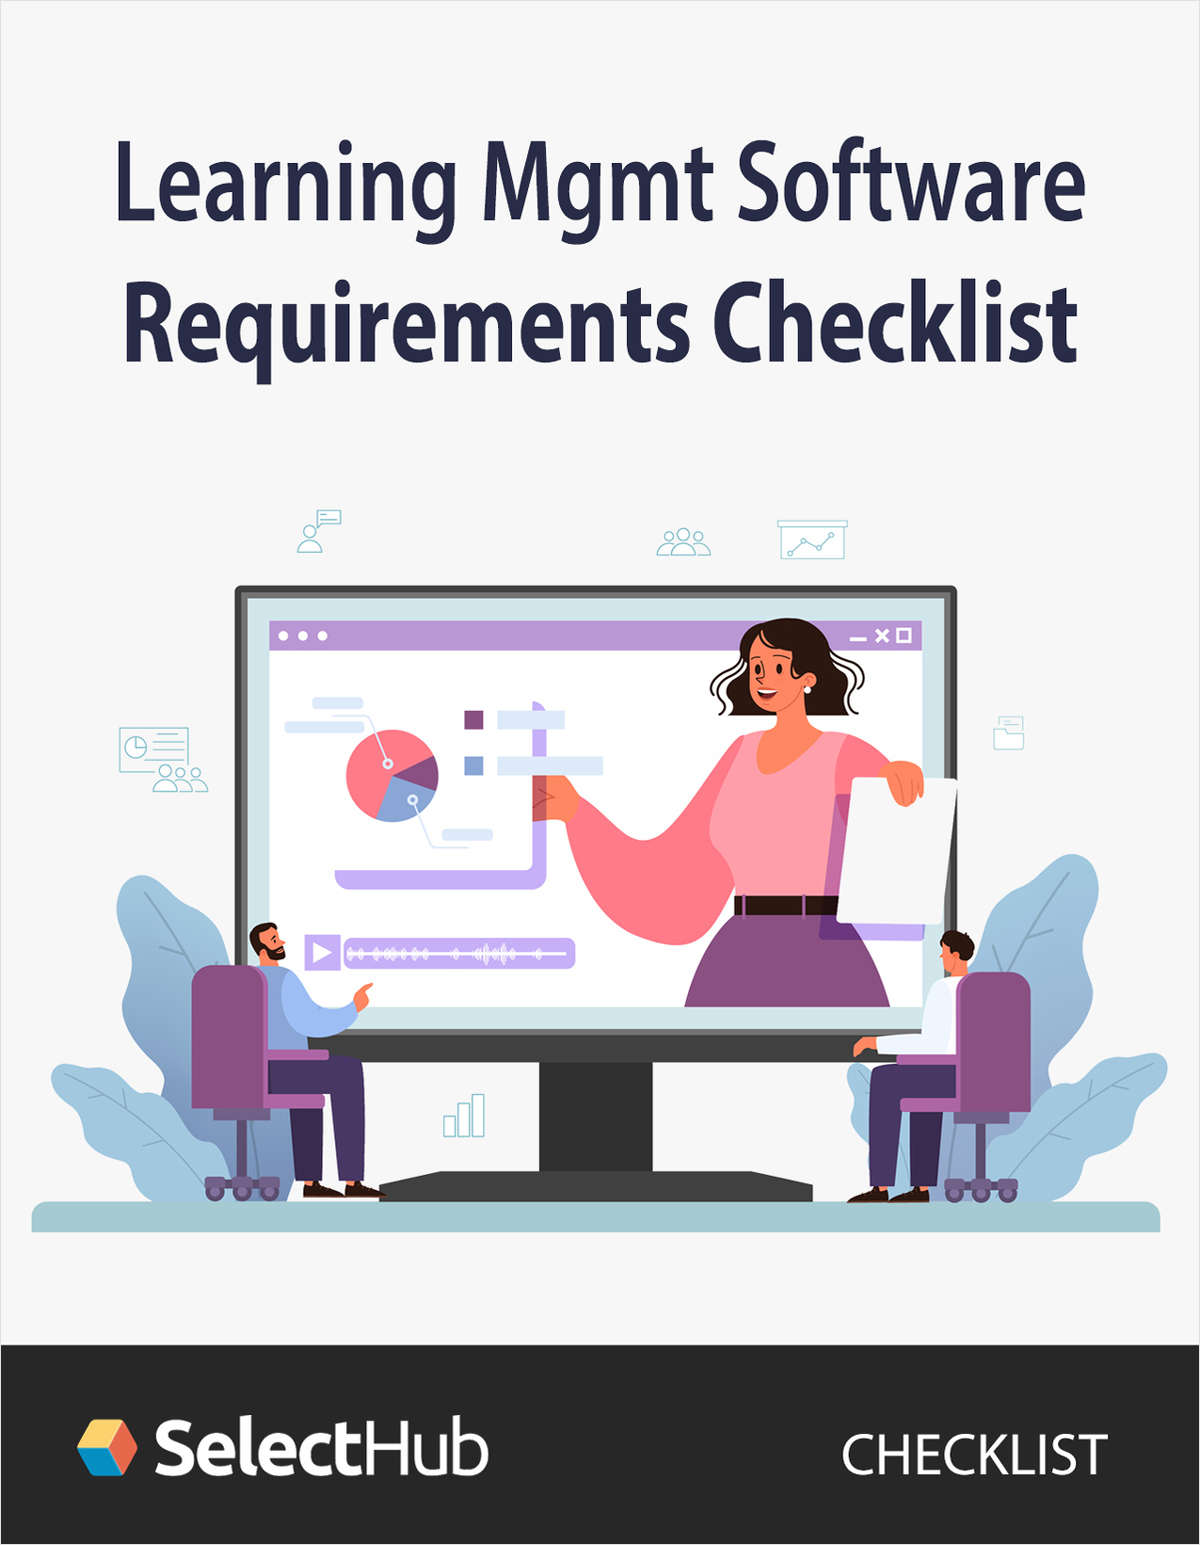 Learning Management System (LMS) Requirements Checklist